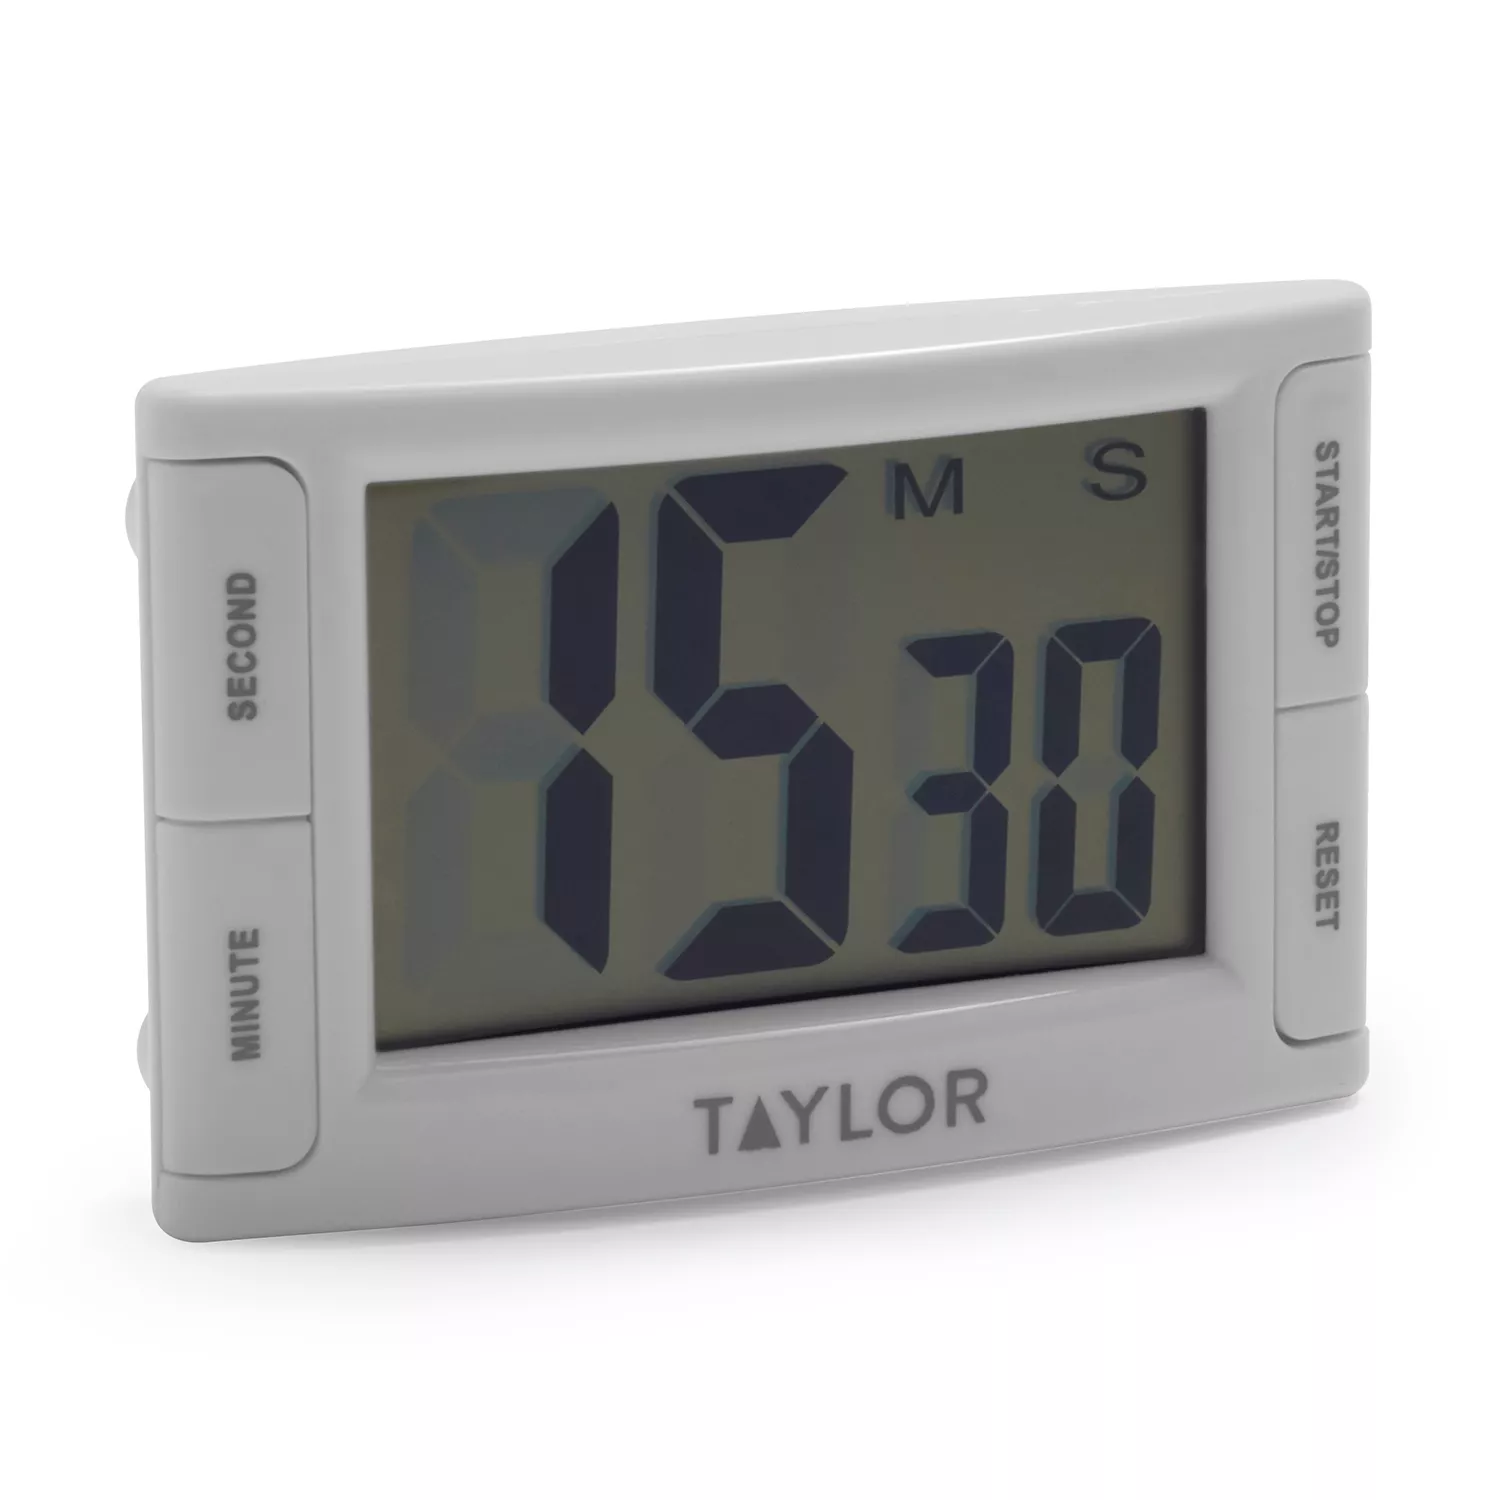 Taylor Super Loud Digital Kitchen Cooking Timer Countertop White